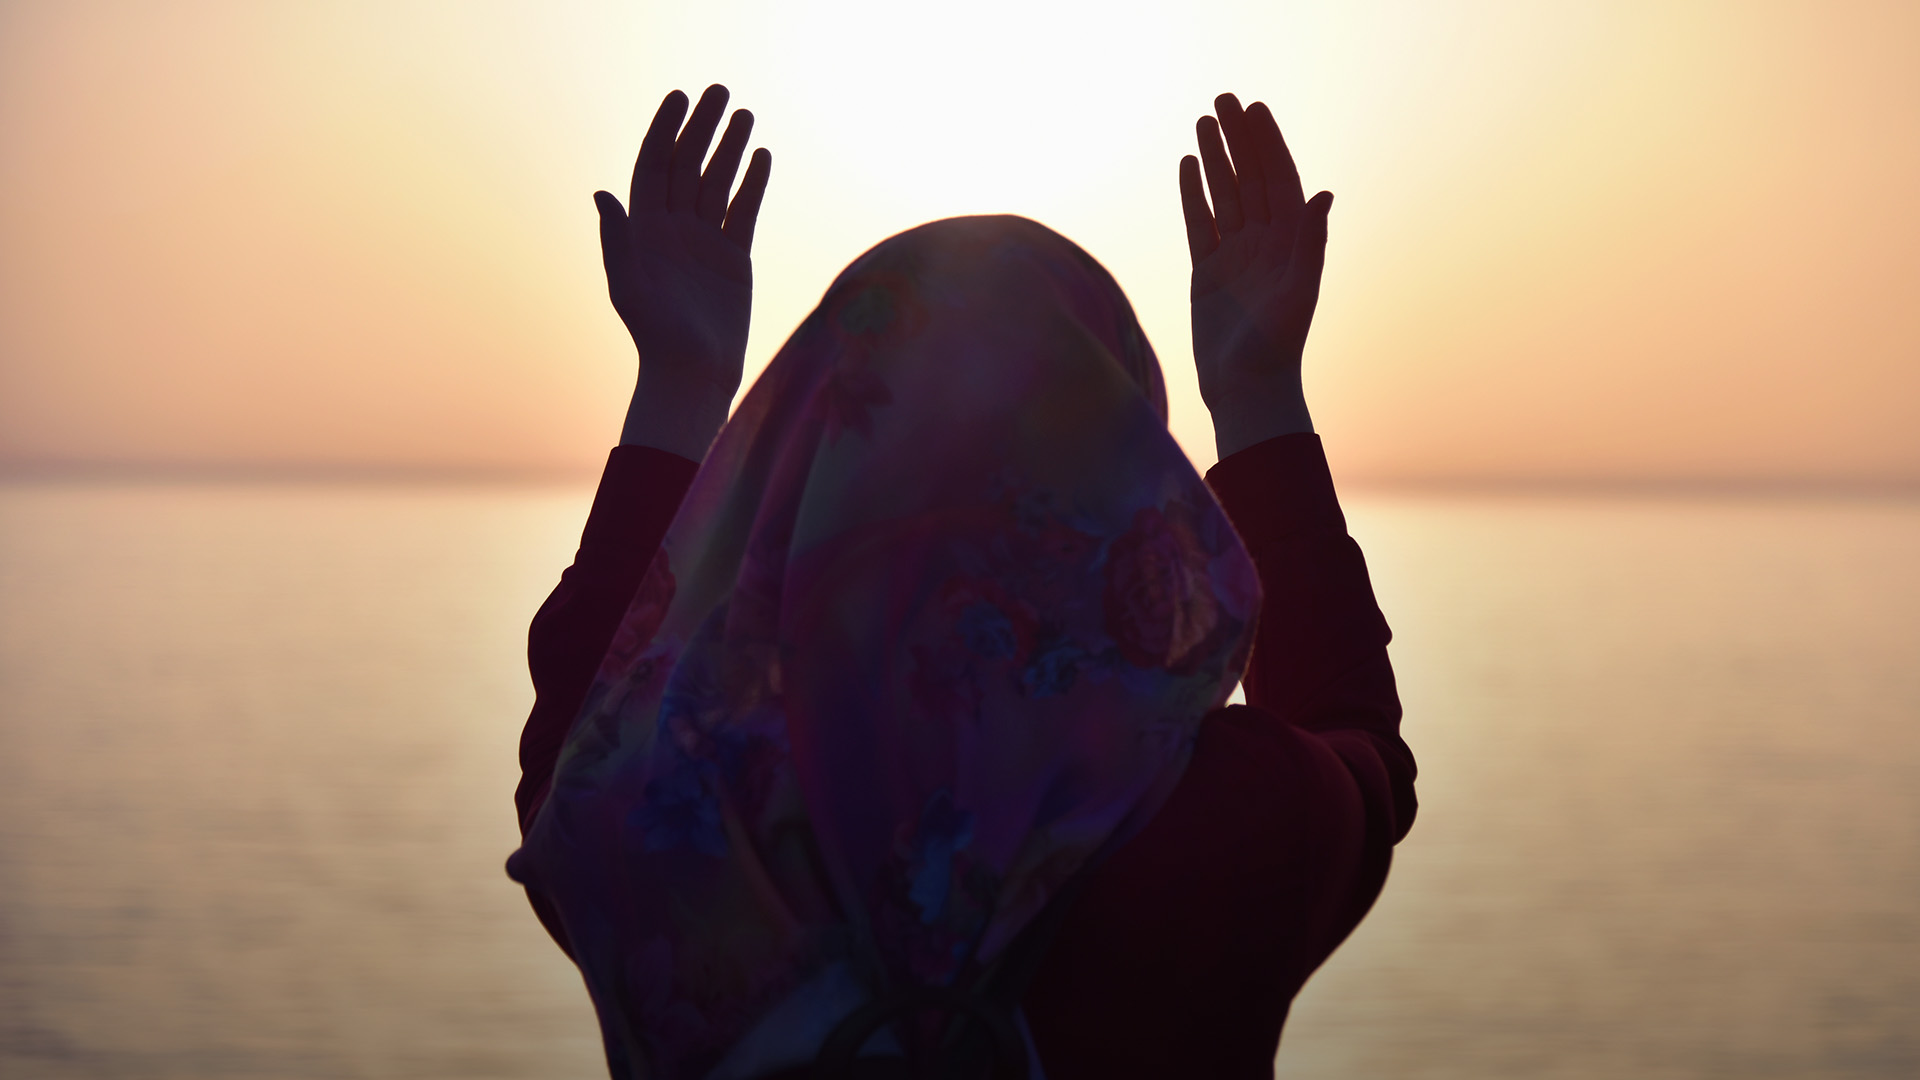 Muslim woman praying in the ship praying at sunset with hands up.